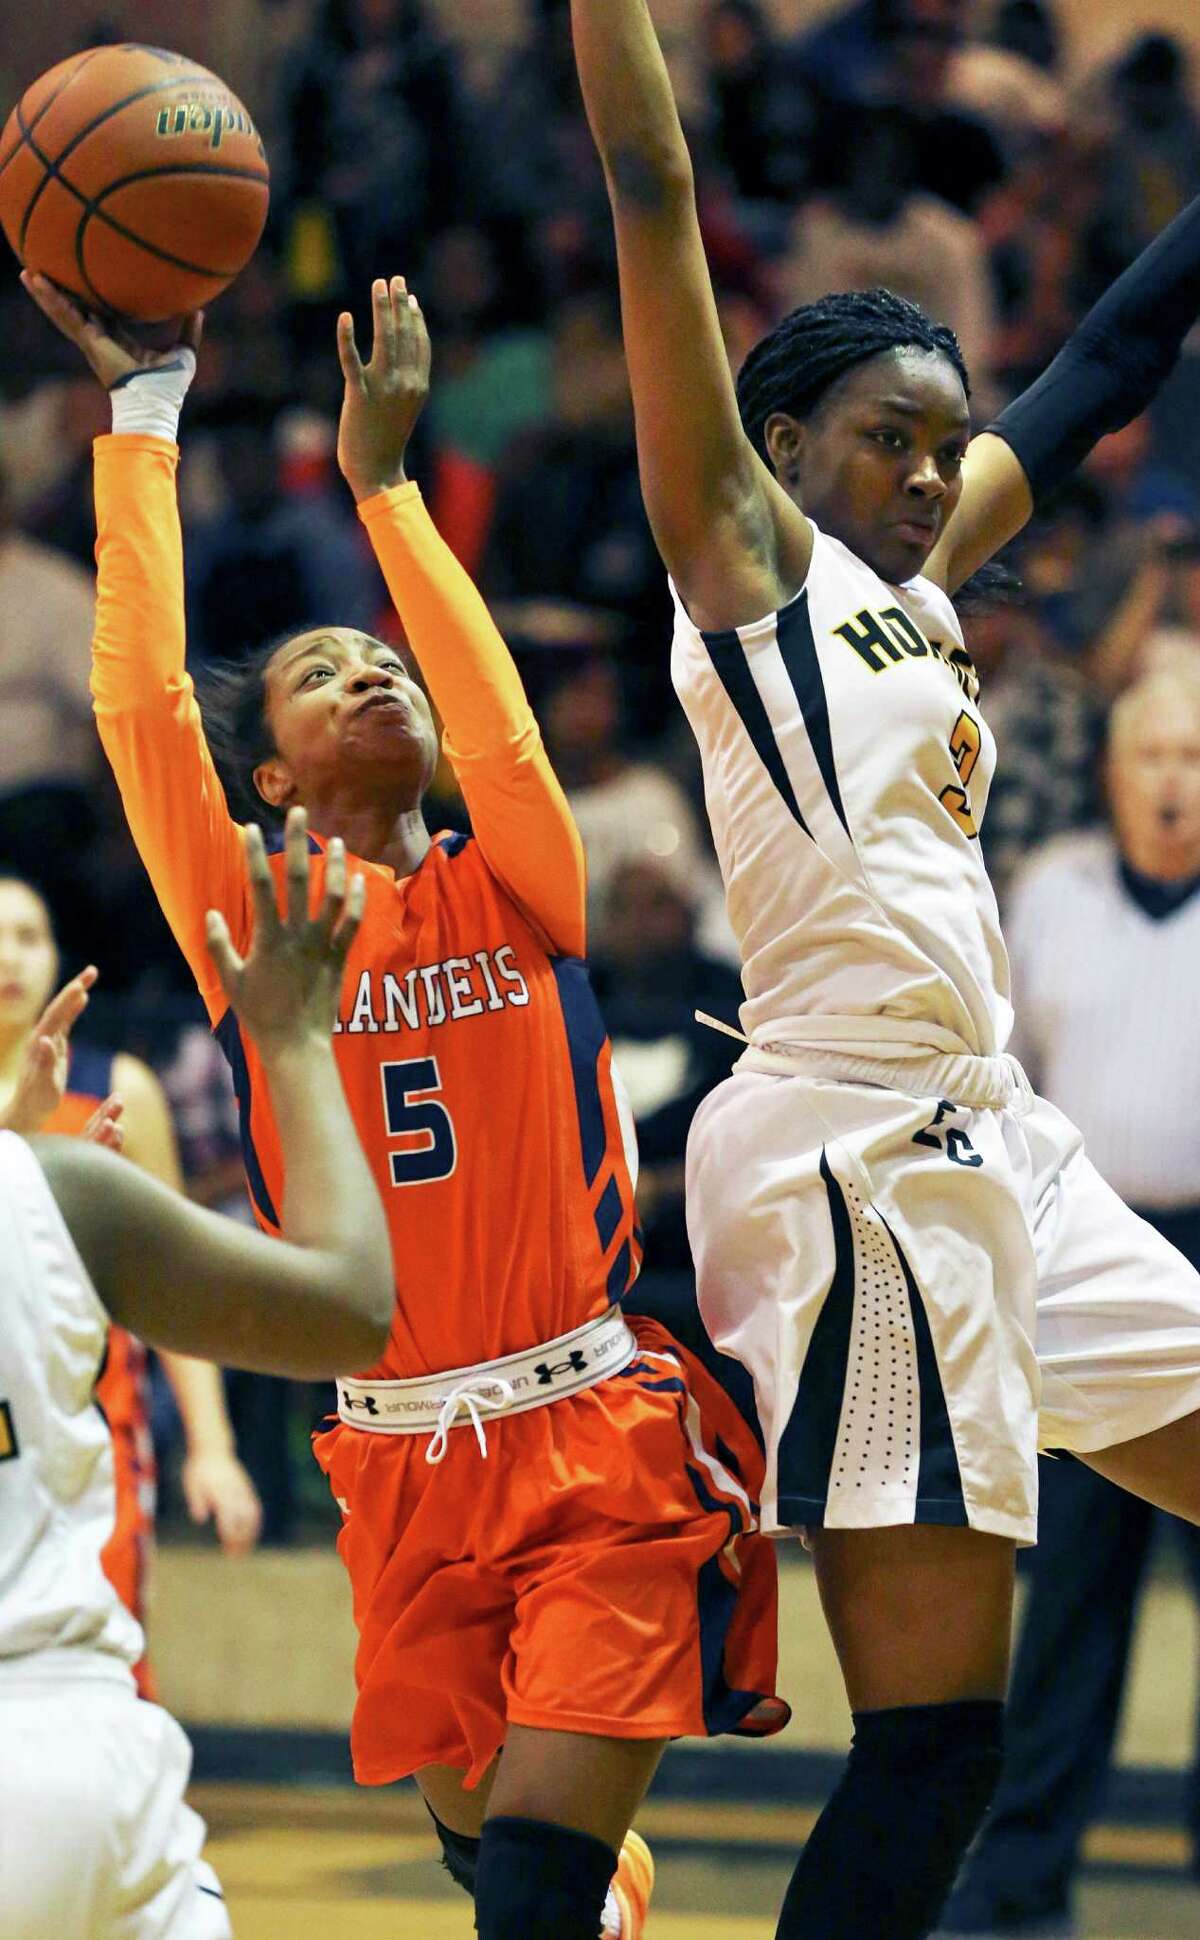 Gabby Connally goes inside for the Broncos to challenge Hornets forward Nalyssa Smith as East Central hosts Brandeis in 6A bi district girls basketball on February 16, 2016.